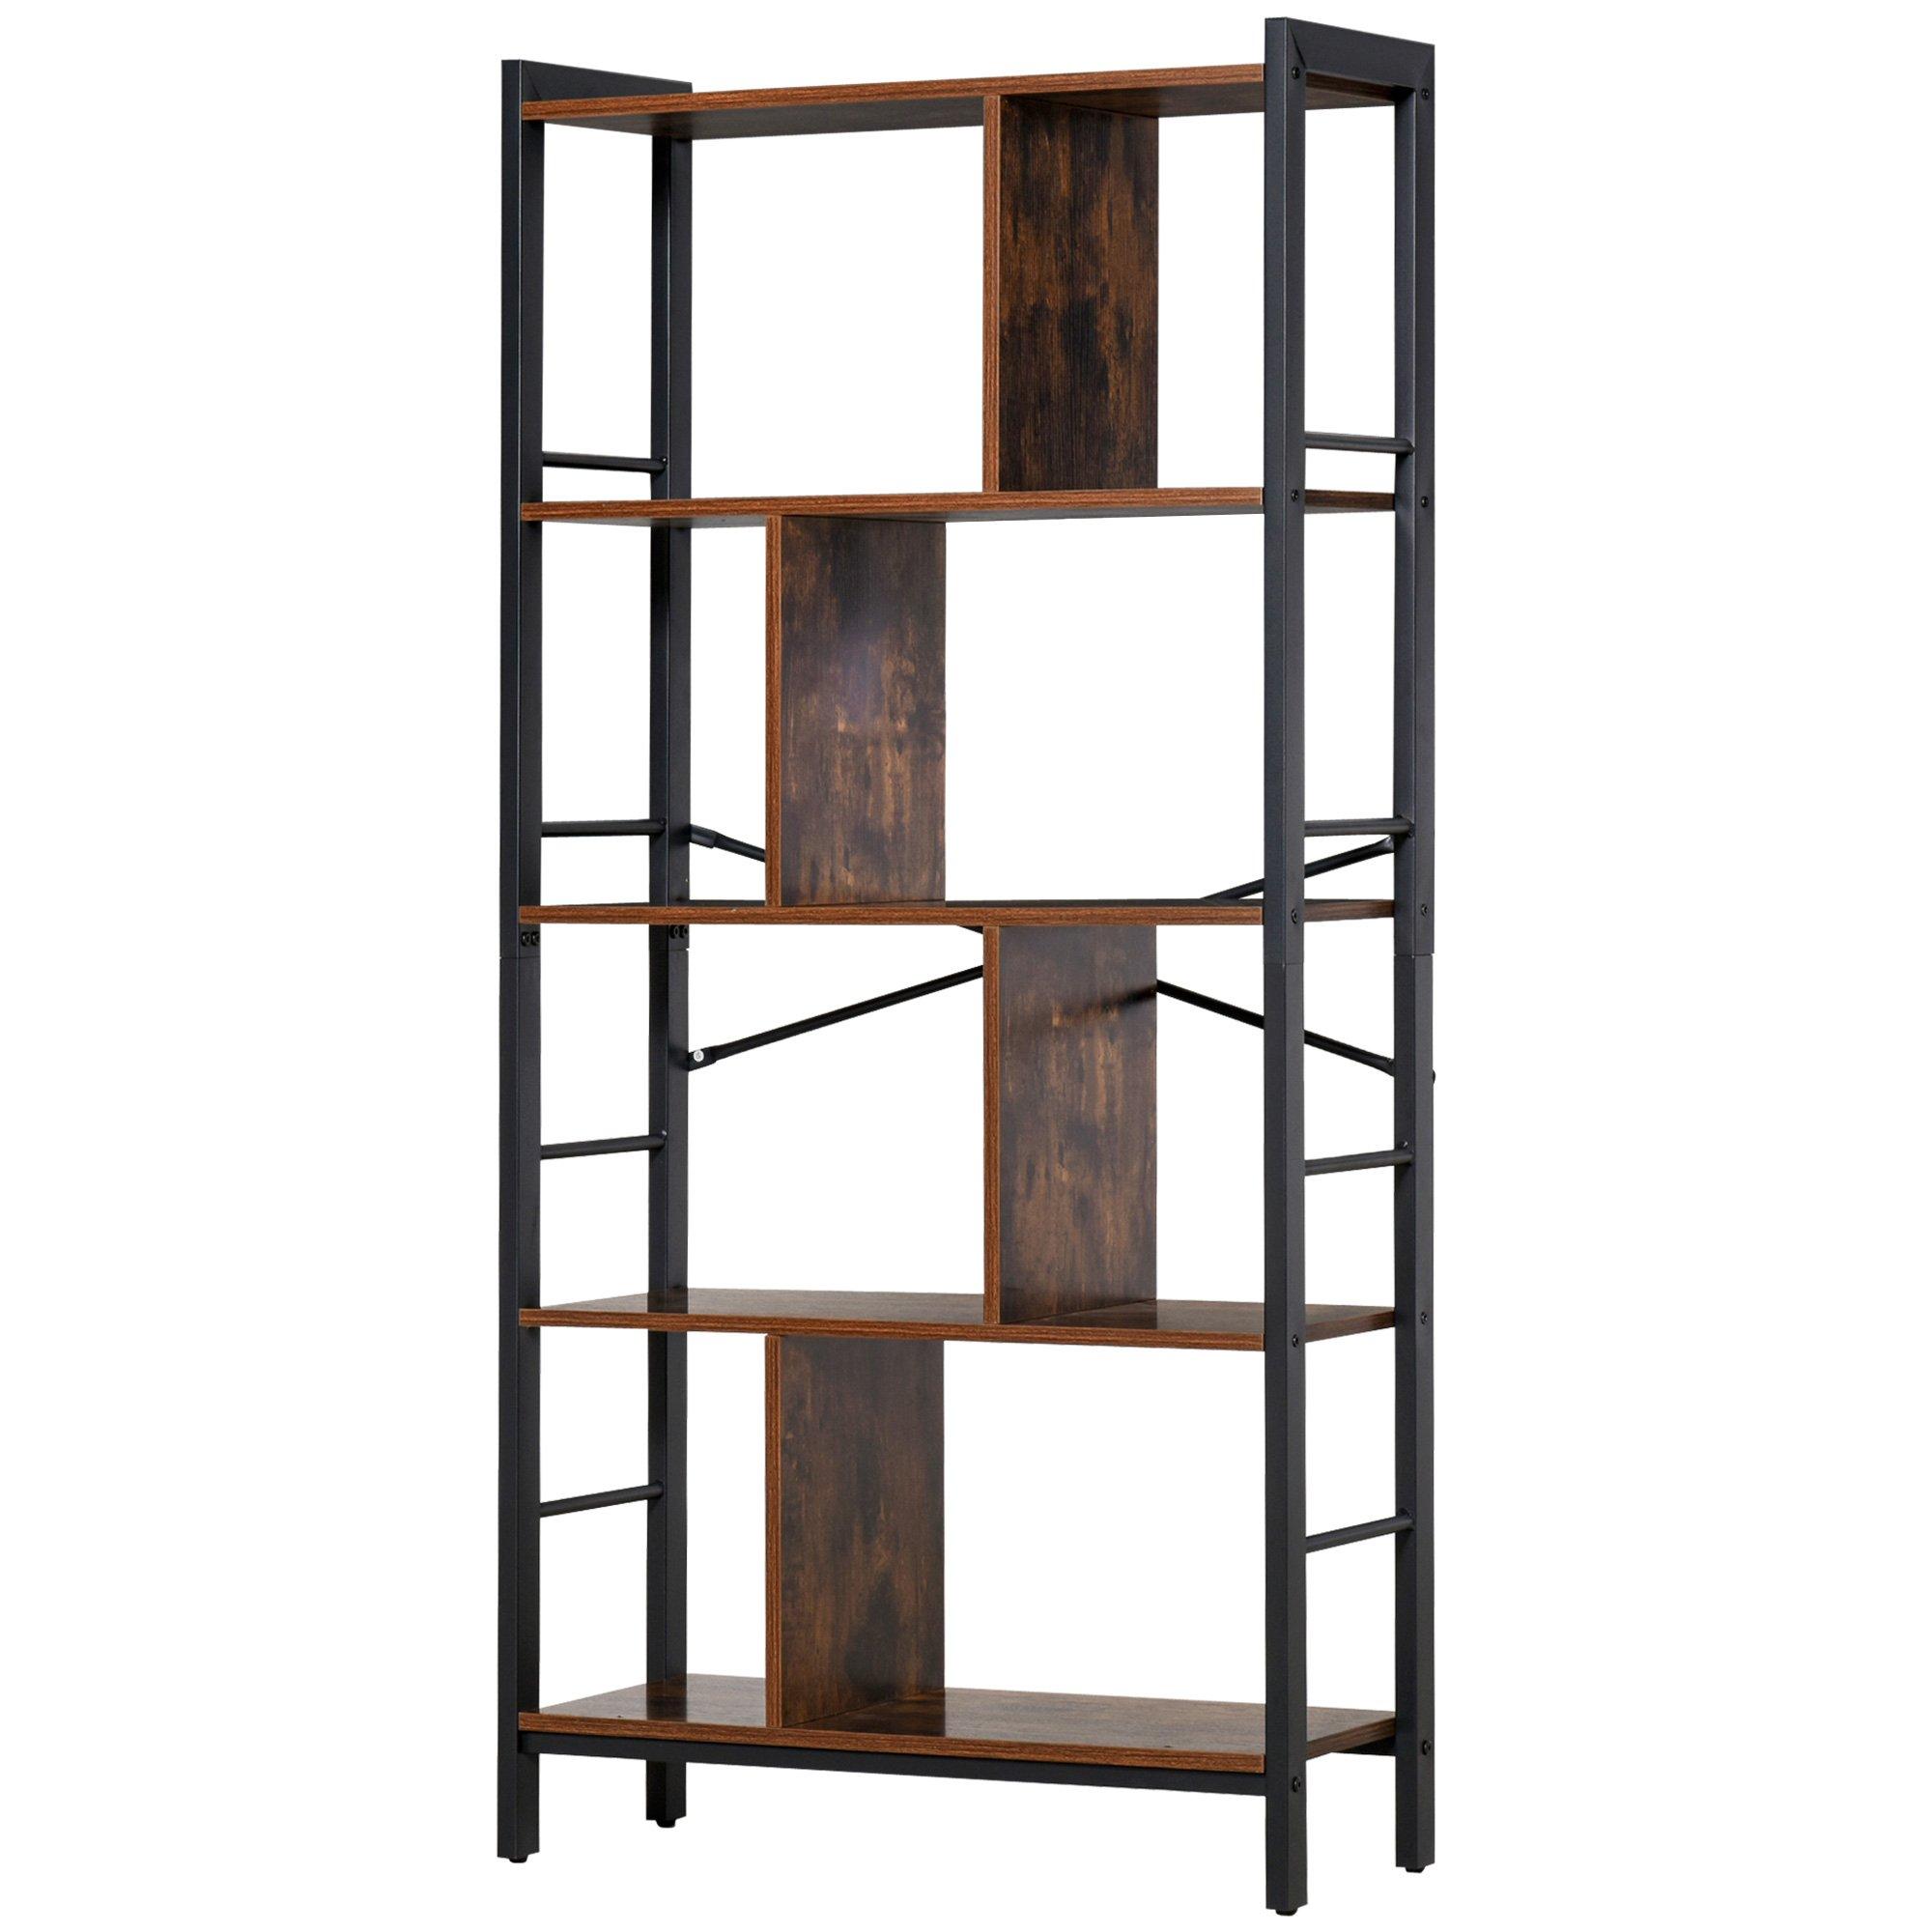 4 Shelf Industrial Style Storage Unit Bookcase with Dividers